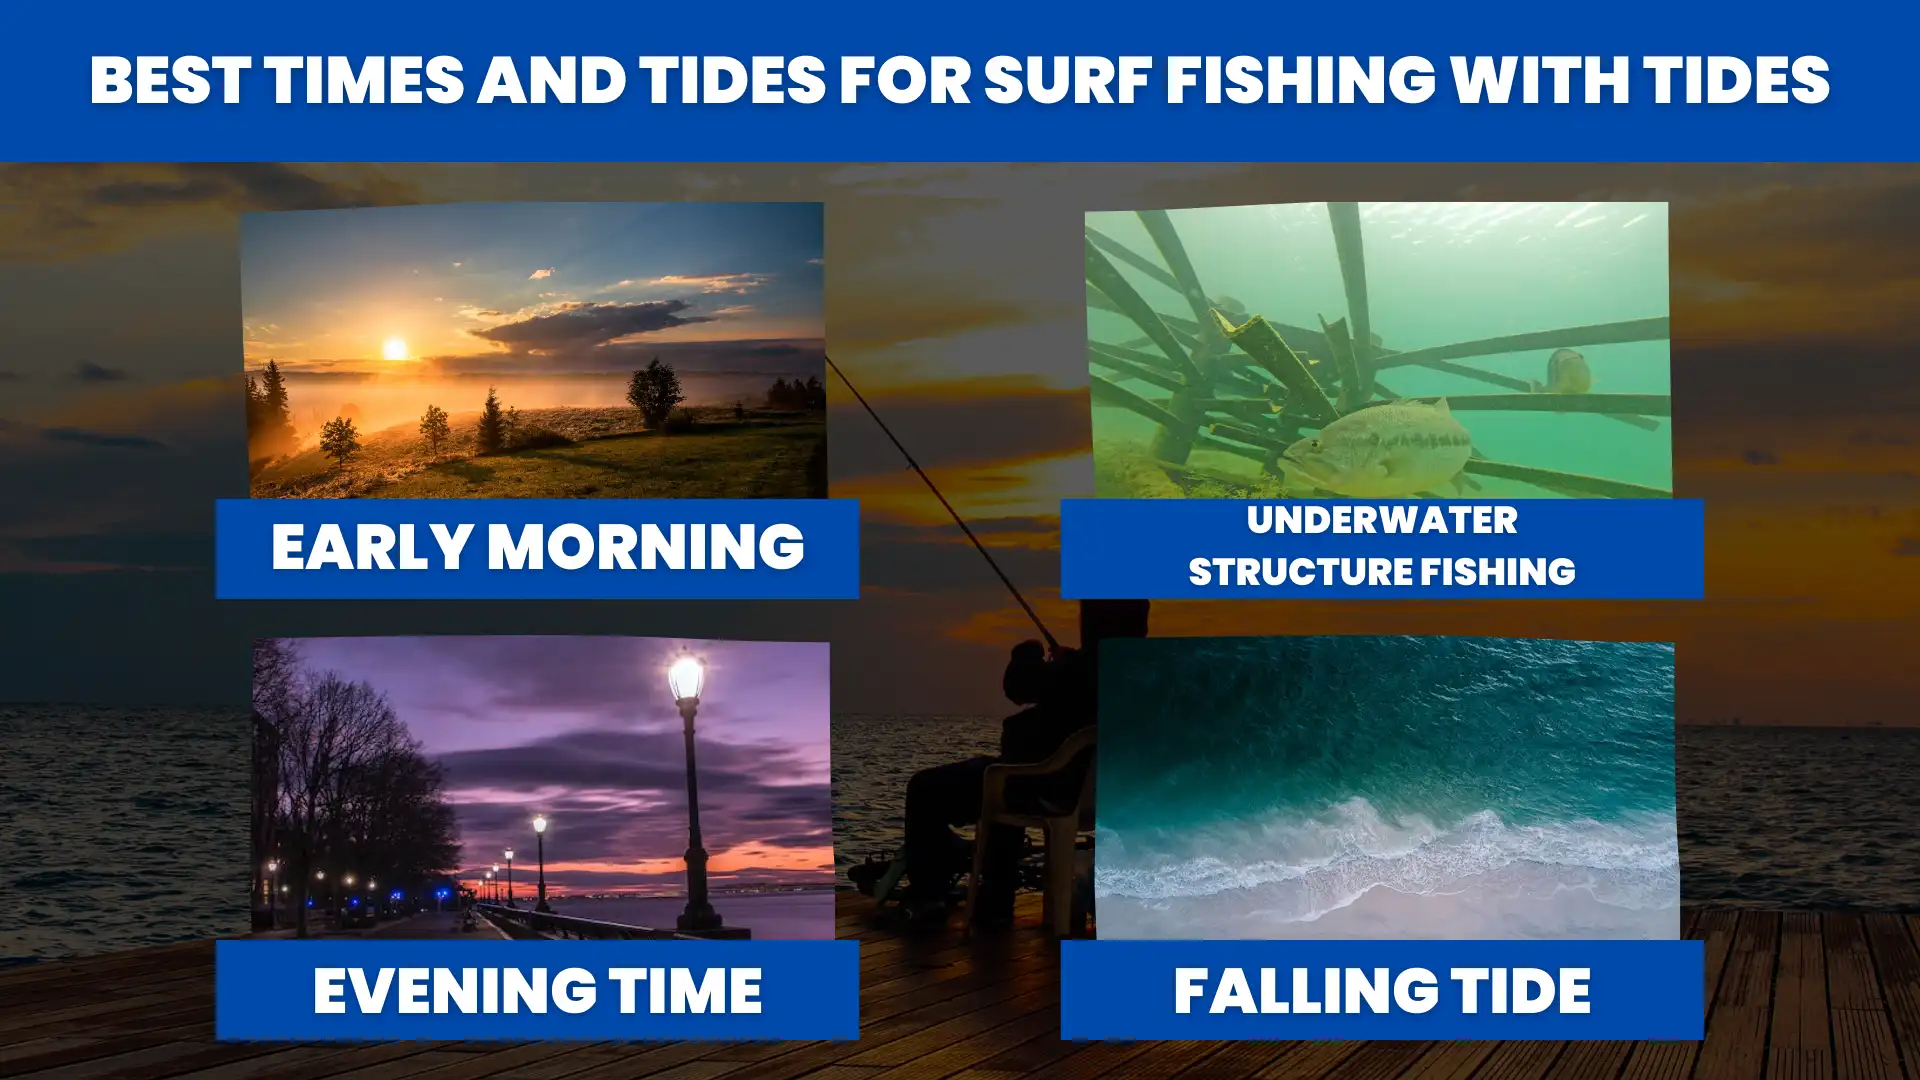 Best Times and Tides for Surf Fishing with Tides